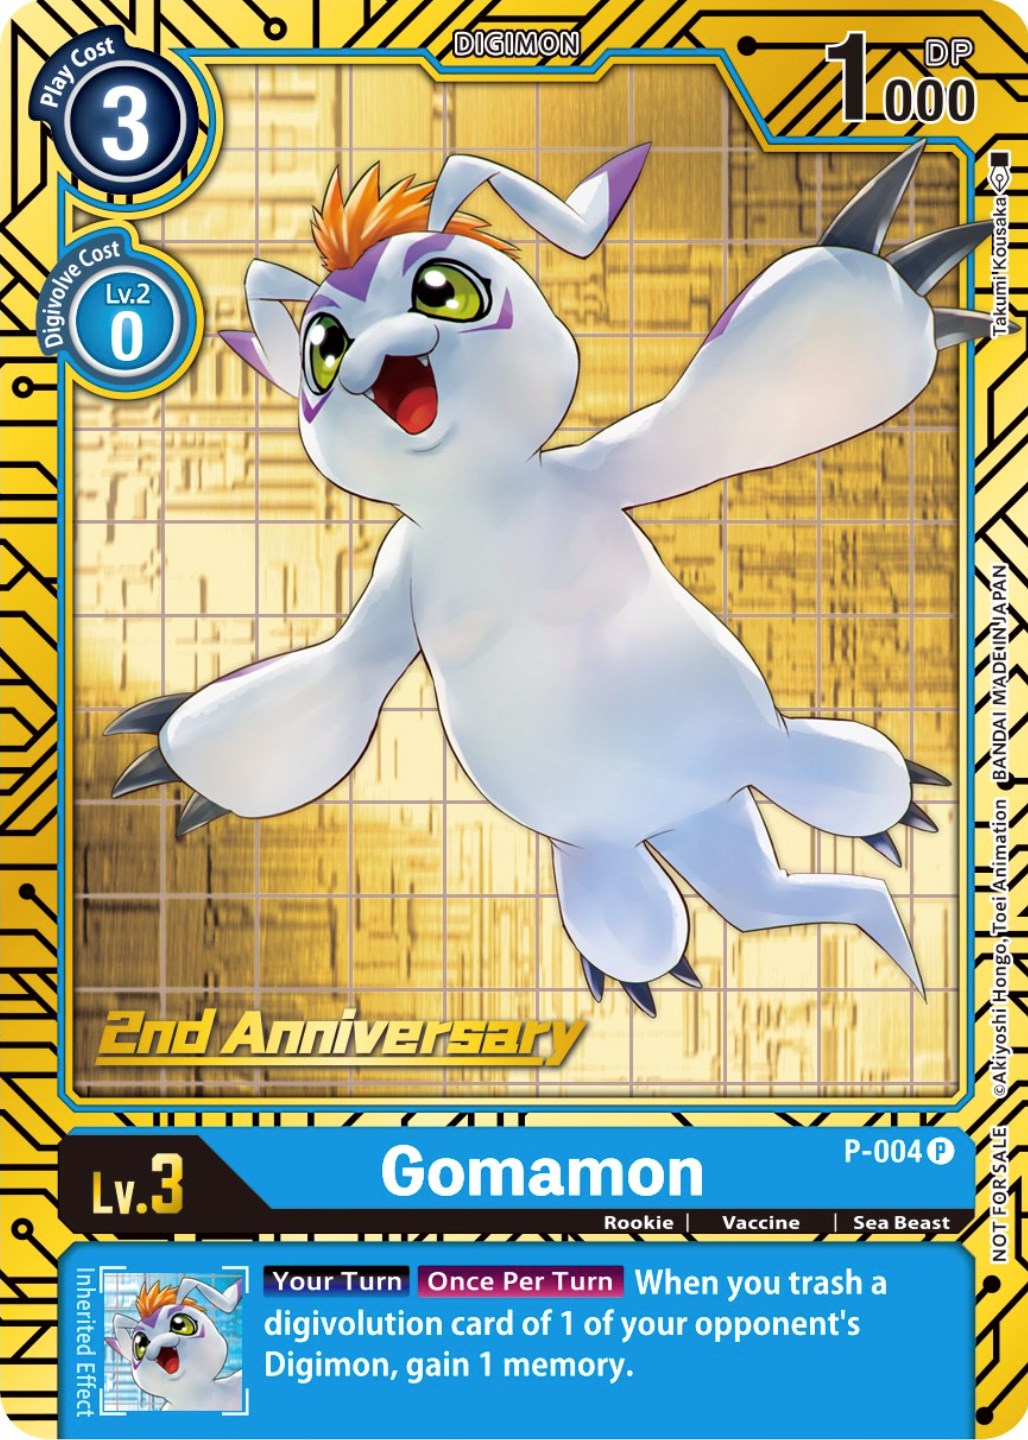 Gomamon [P-004] (2nd Anniversary Card Set) [Promotional Cards] | Arkham Games and Comics